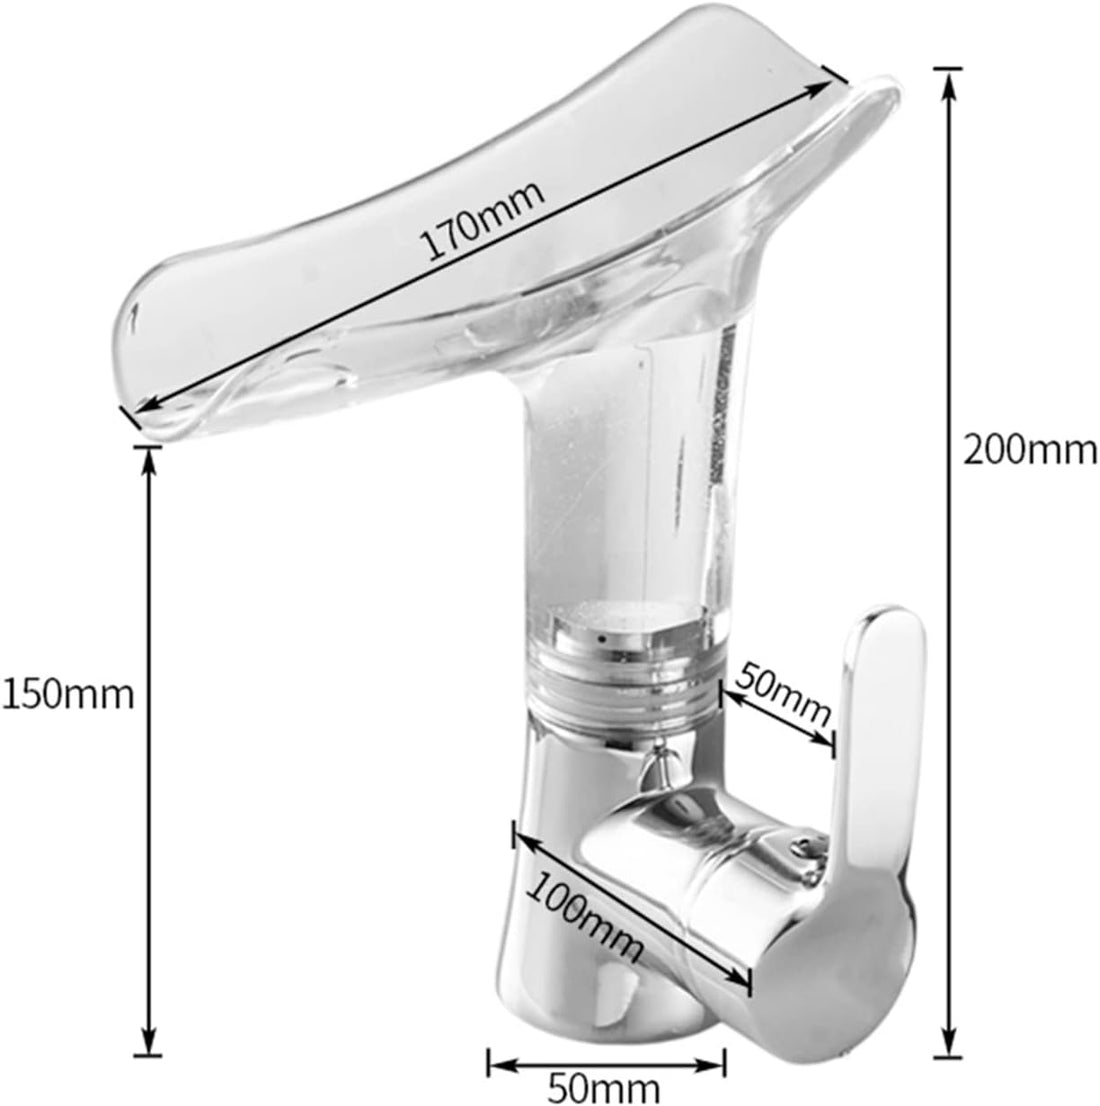 InArt Single Lever Basin Mixer Taps for Bathroom Brass Chrome Transparent Waterfall BF058 - InArt-Studio